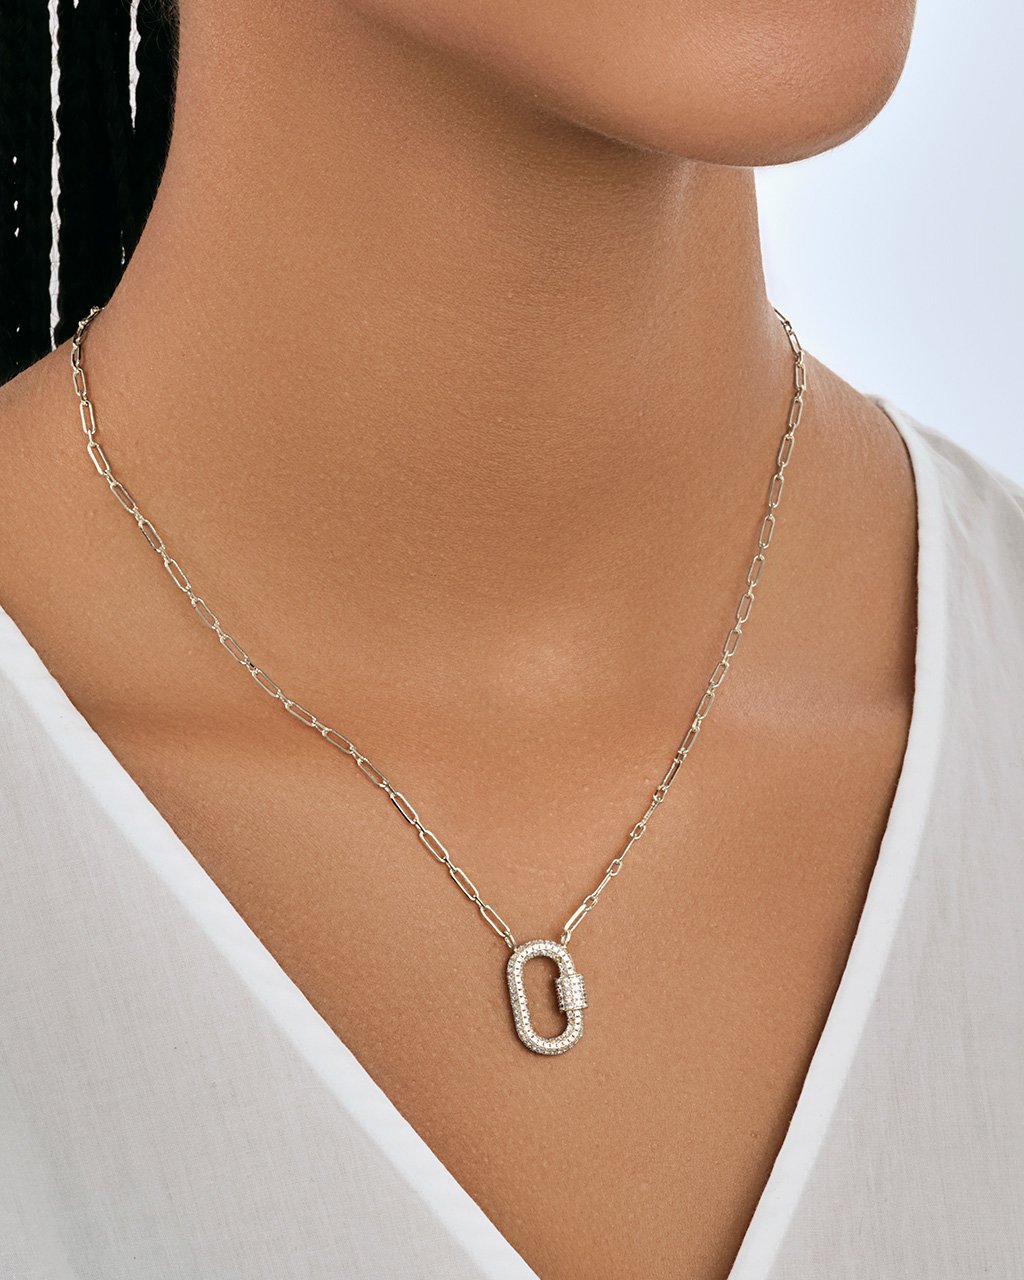 Chunky Gold Carabiner Necklace-Circle Heart Pendant CZ Stone Chain